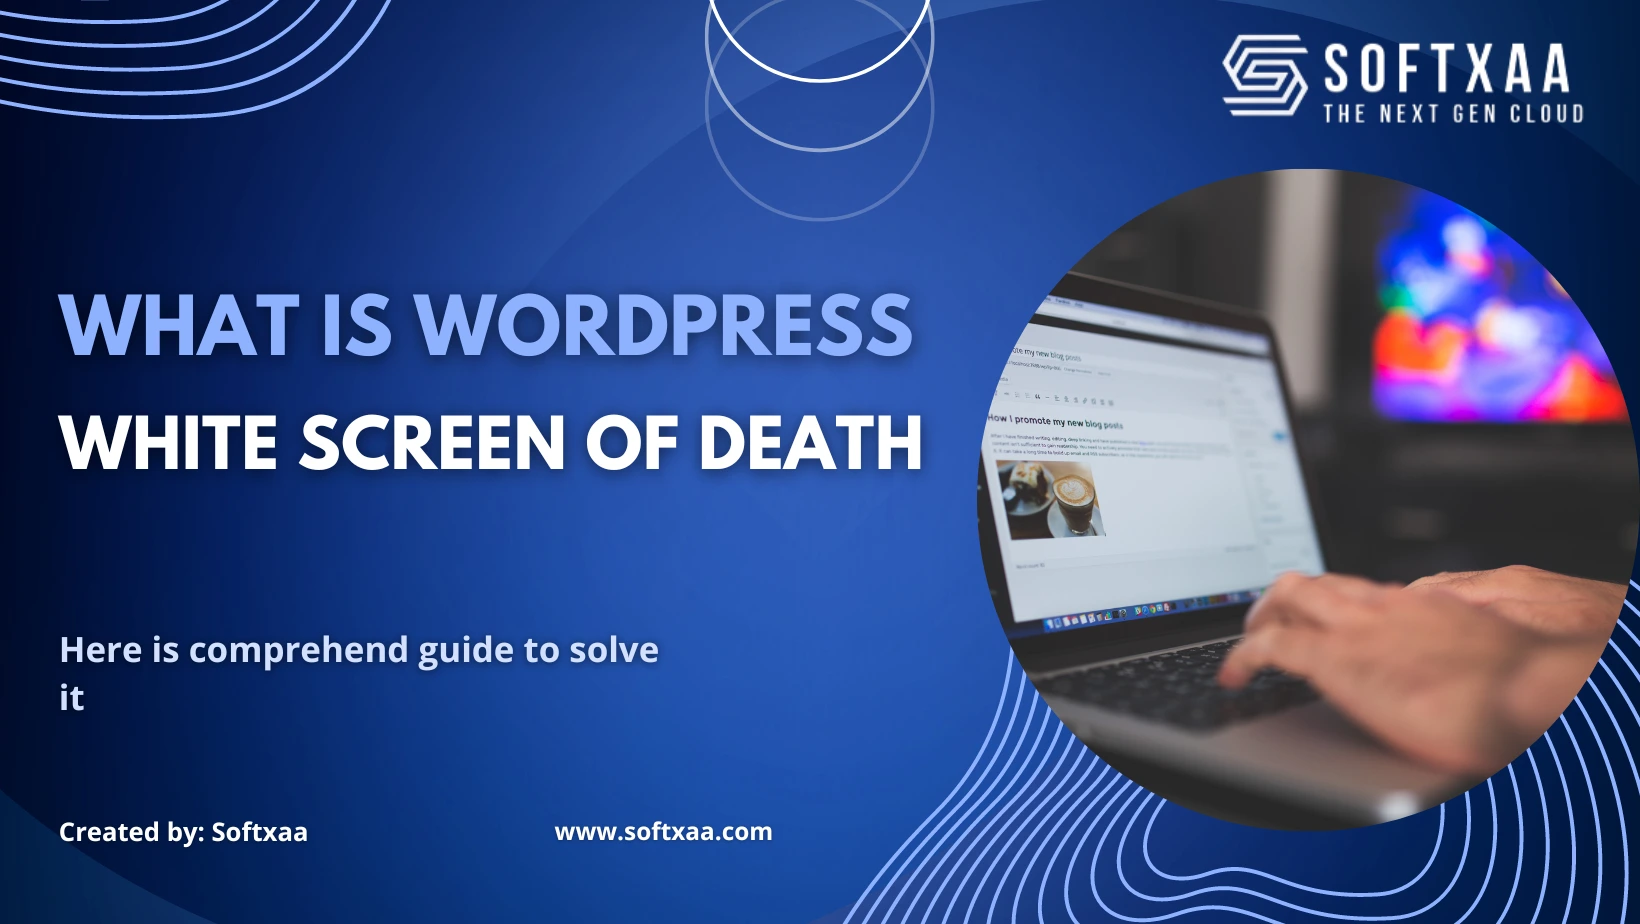 What is the WordPress White Screen of Death?